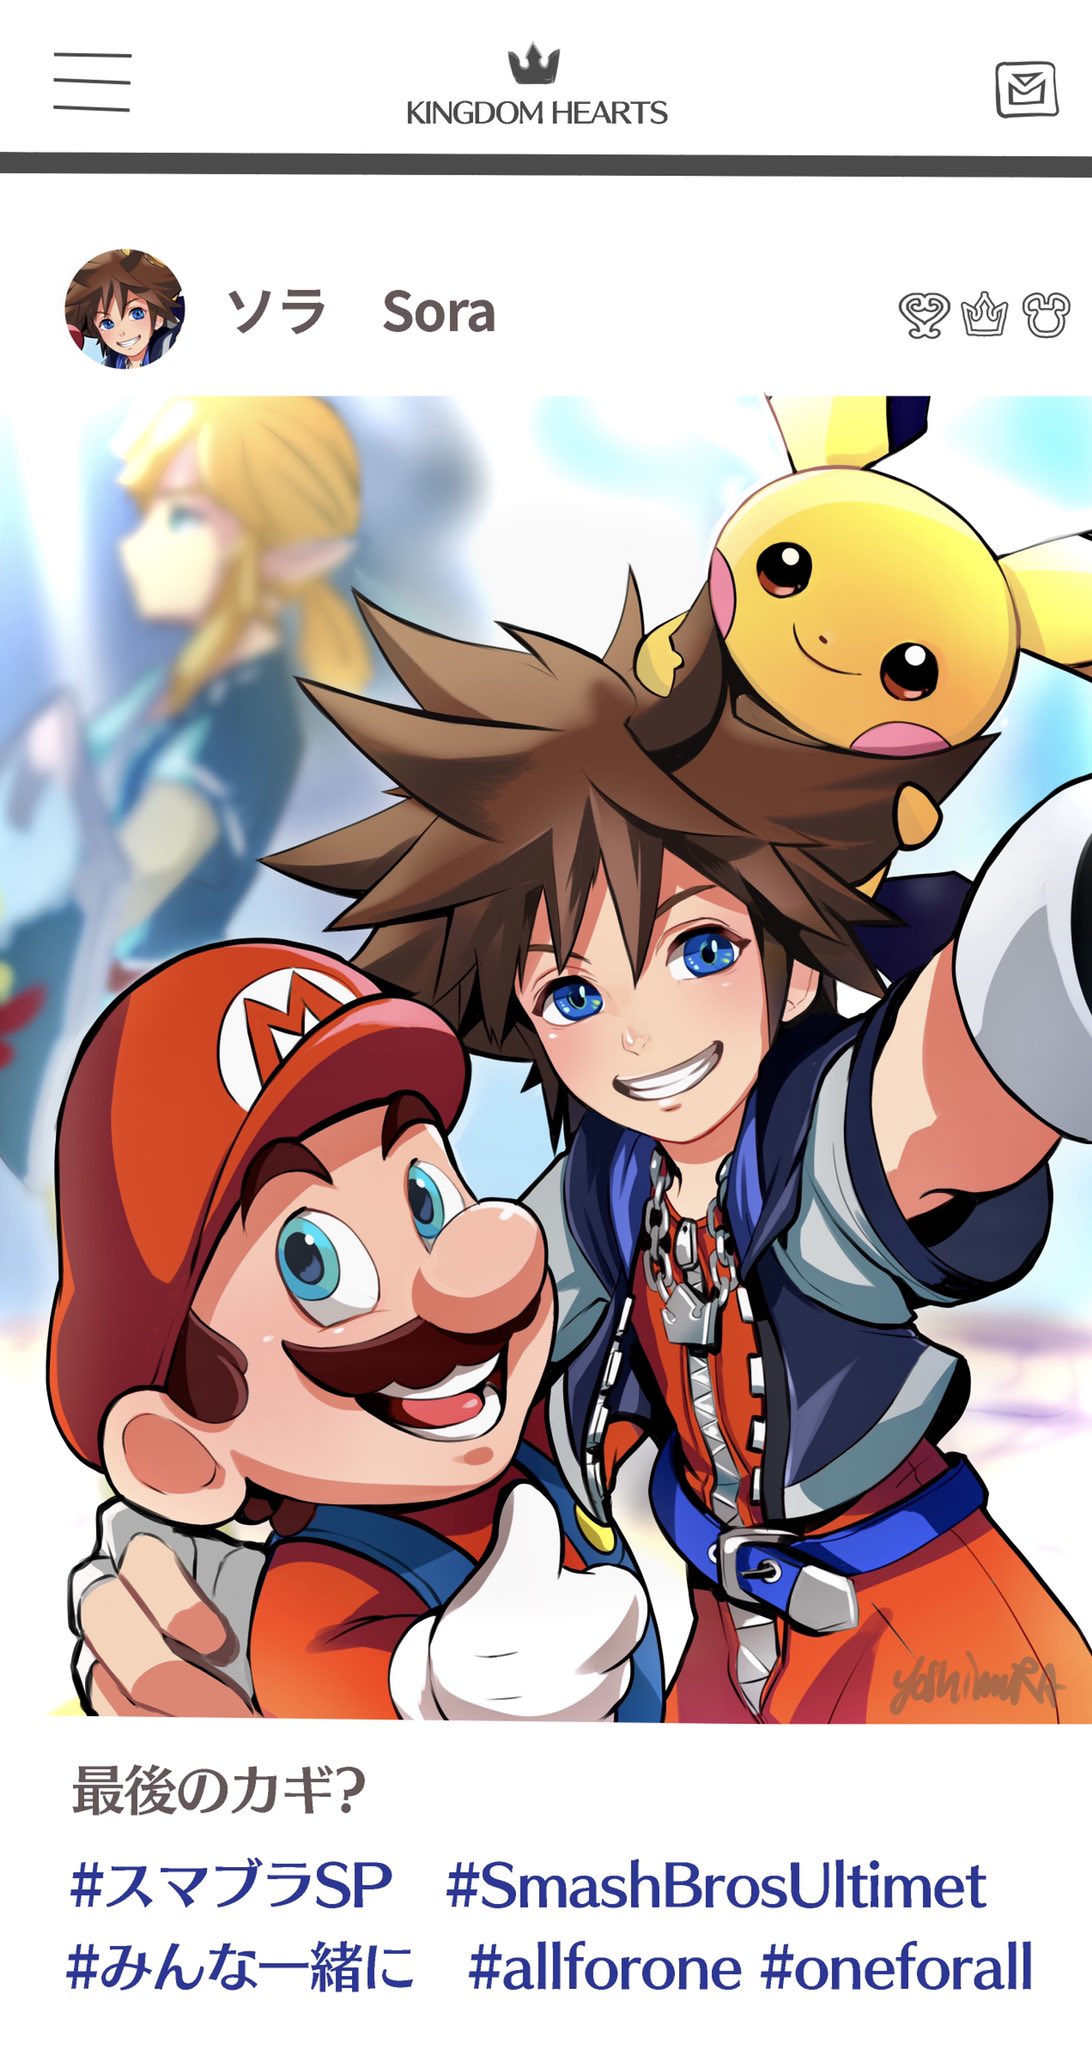 3boys blonde_hair blue_eyes brown_hair bumble_tmnt facial_hair fingerless_gloves gloves hat highres jewelry keyblade kingdom_hearts link male_focus mario master_sword multiple_boys mustache necklace open_mouth pichu pointy_ears pokemon pokemon_(creature) selfie smile sora_(kingdom_hearts) spiky_hair super_mario_bros. super_smash_bros. the_legend_of_zelda the_legend_of_zelda:_breath_of_the_wild tunic